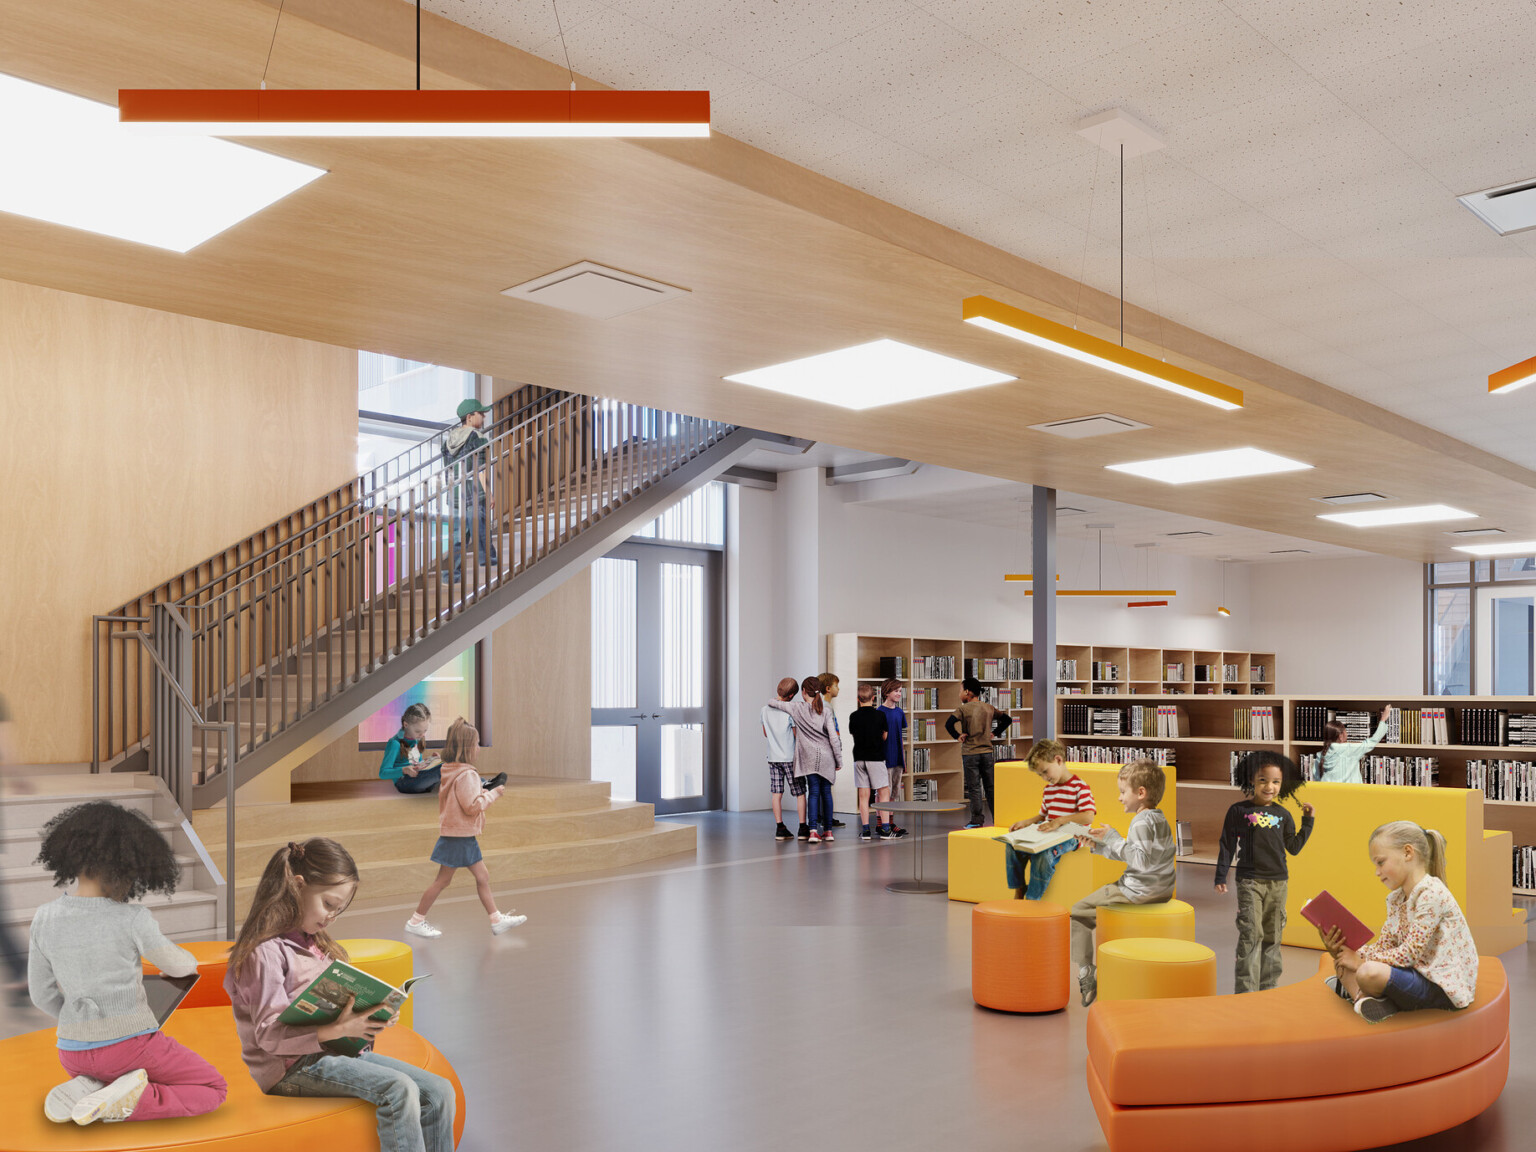 learning area with high ceilings, light wood paneled walls with yellow and orange ombre accent elements, light wood book shelves, polished concrete flooring, colorful seating, steel staircase leads to second floor